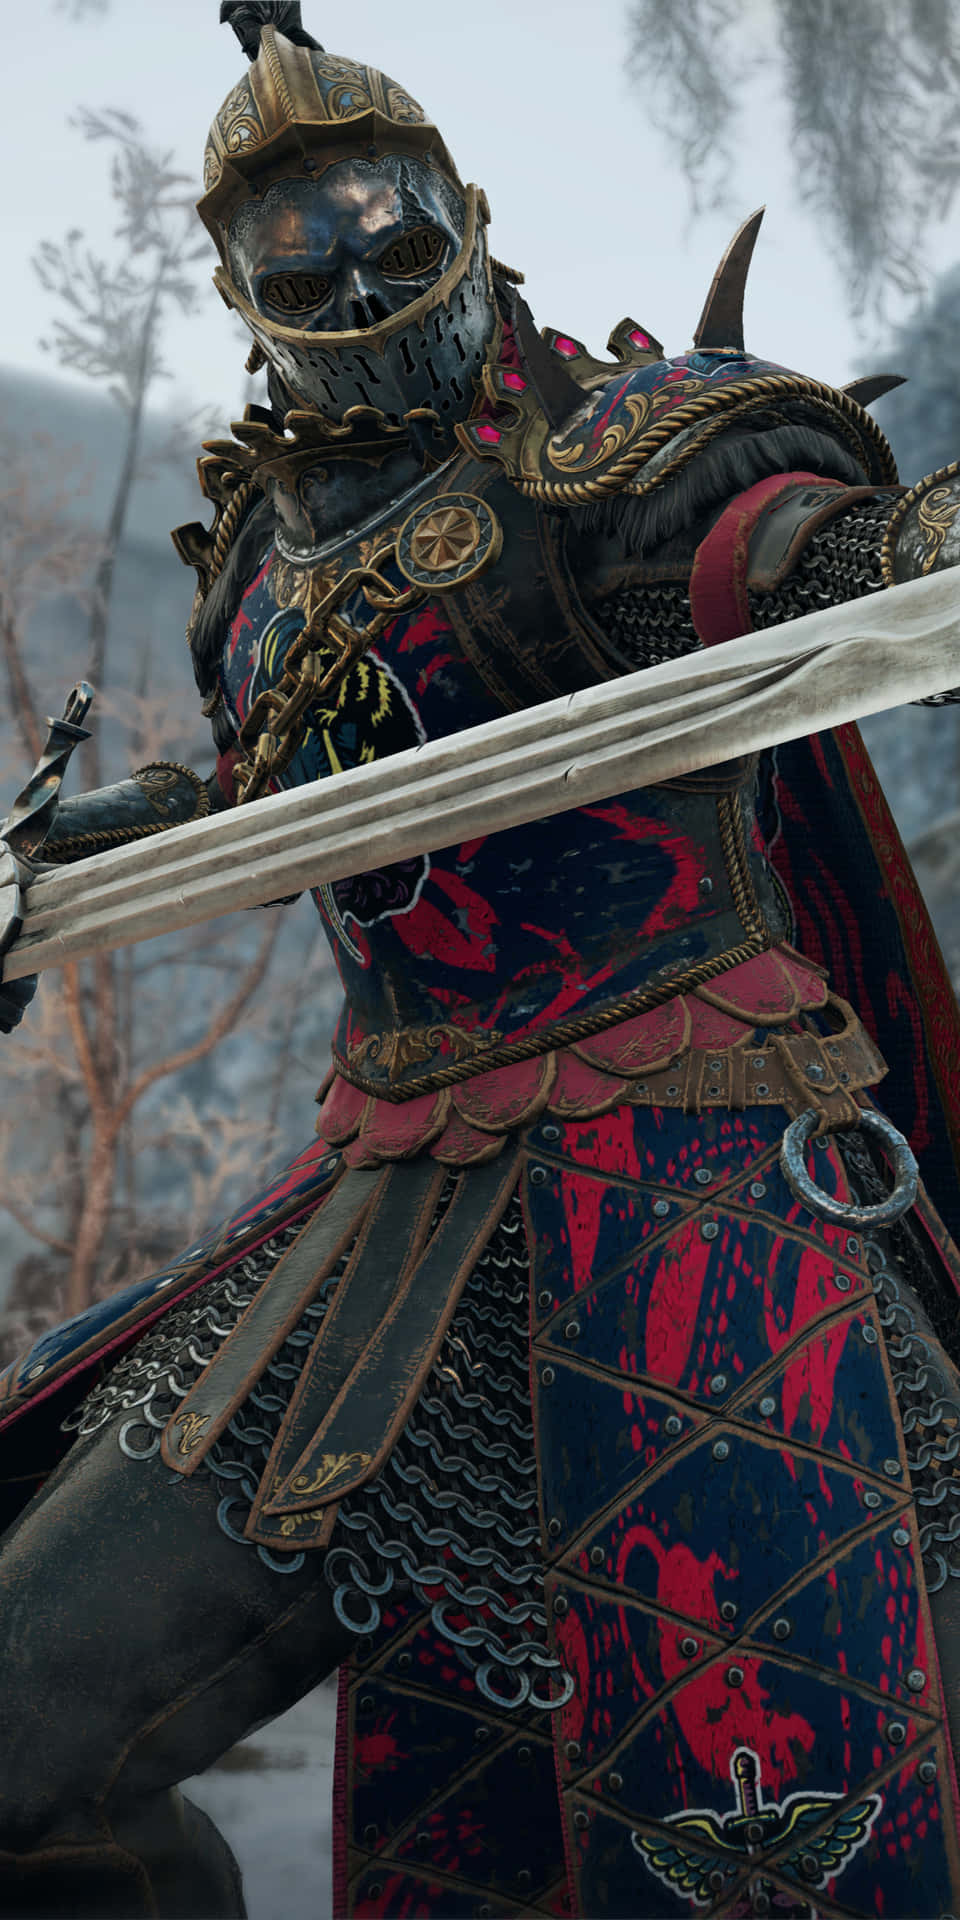 Pixel 3 For Honor Warmonger With Black Armor Background